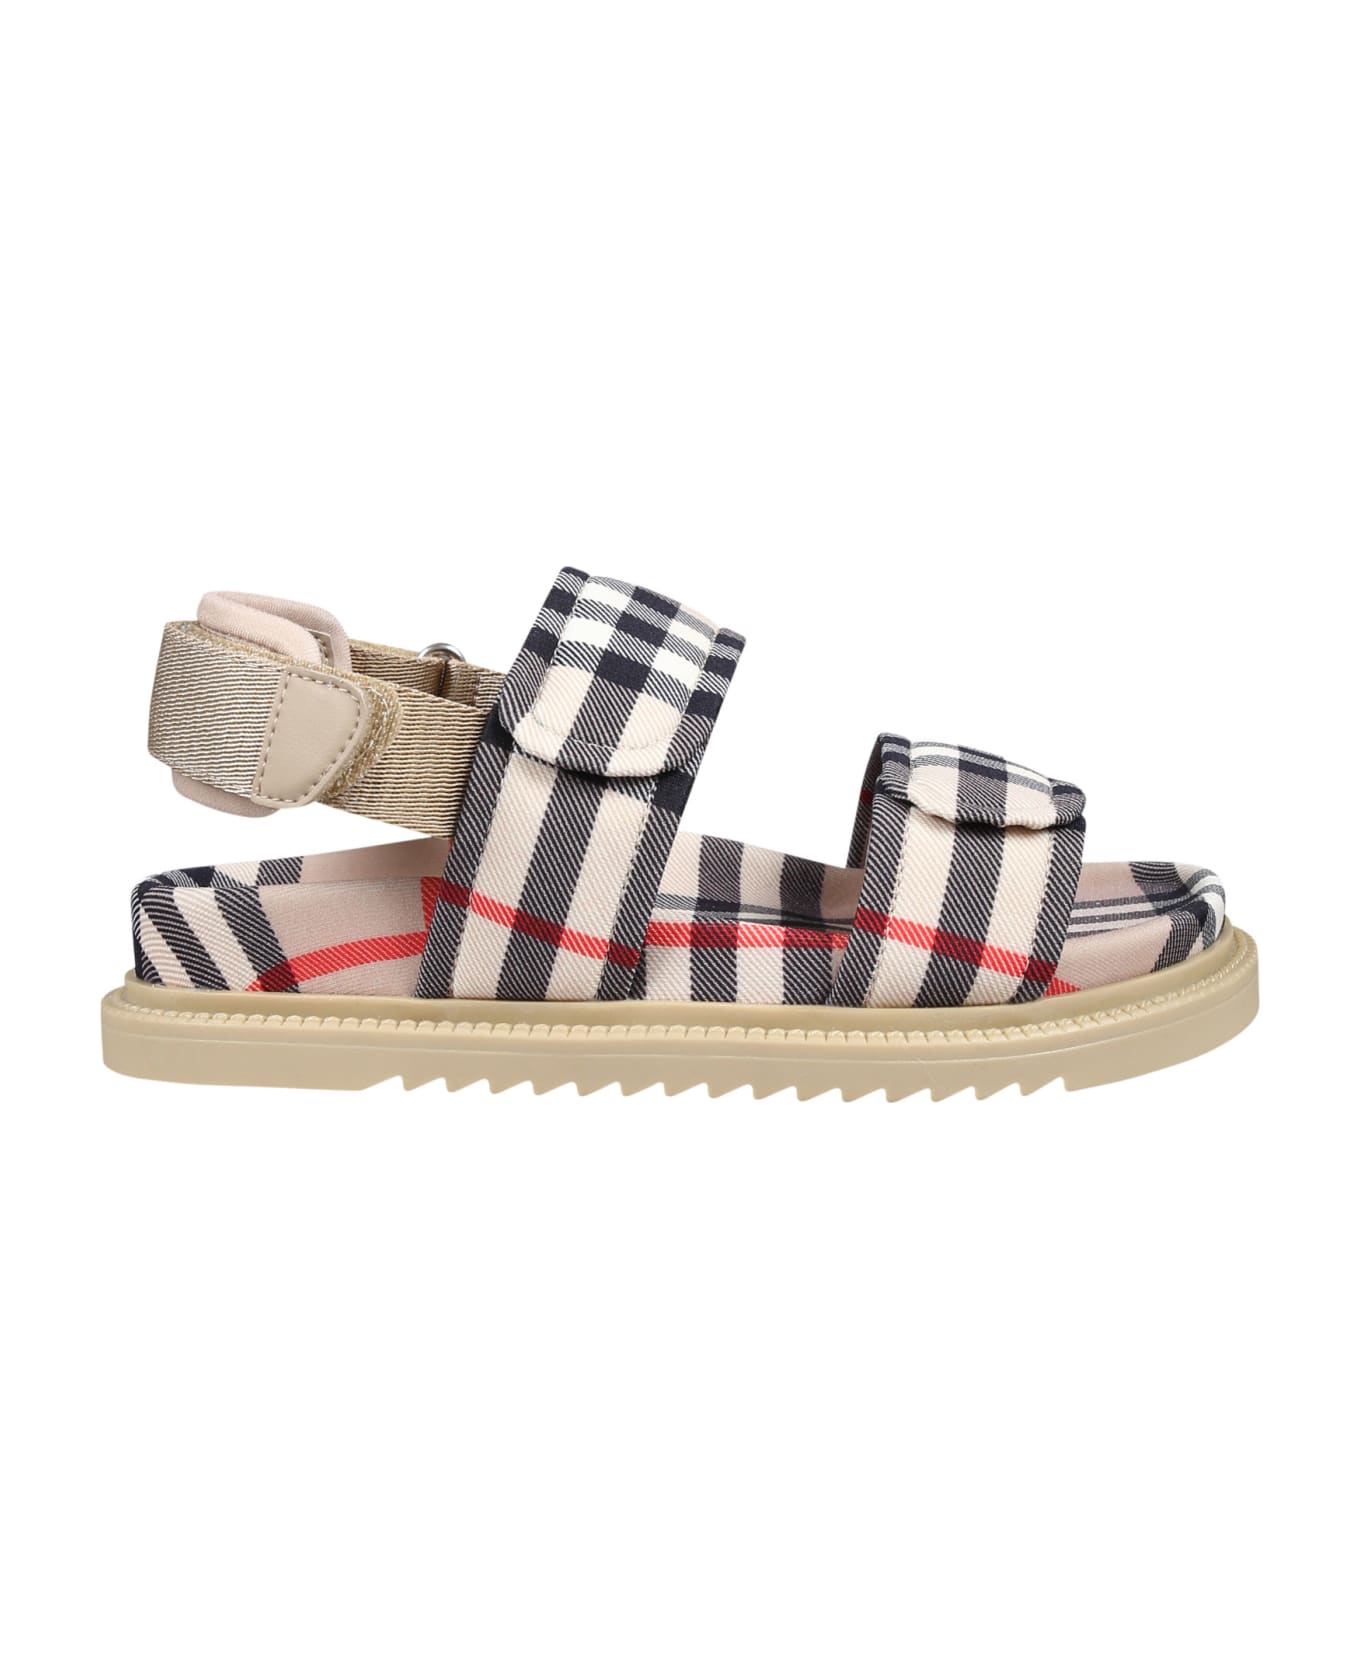 Burberry Beige Sandals For Kids With Vintage Check - Archive beige